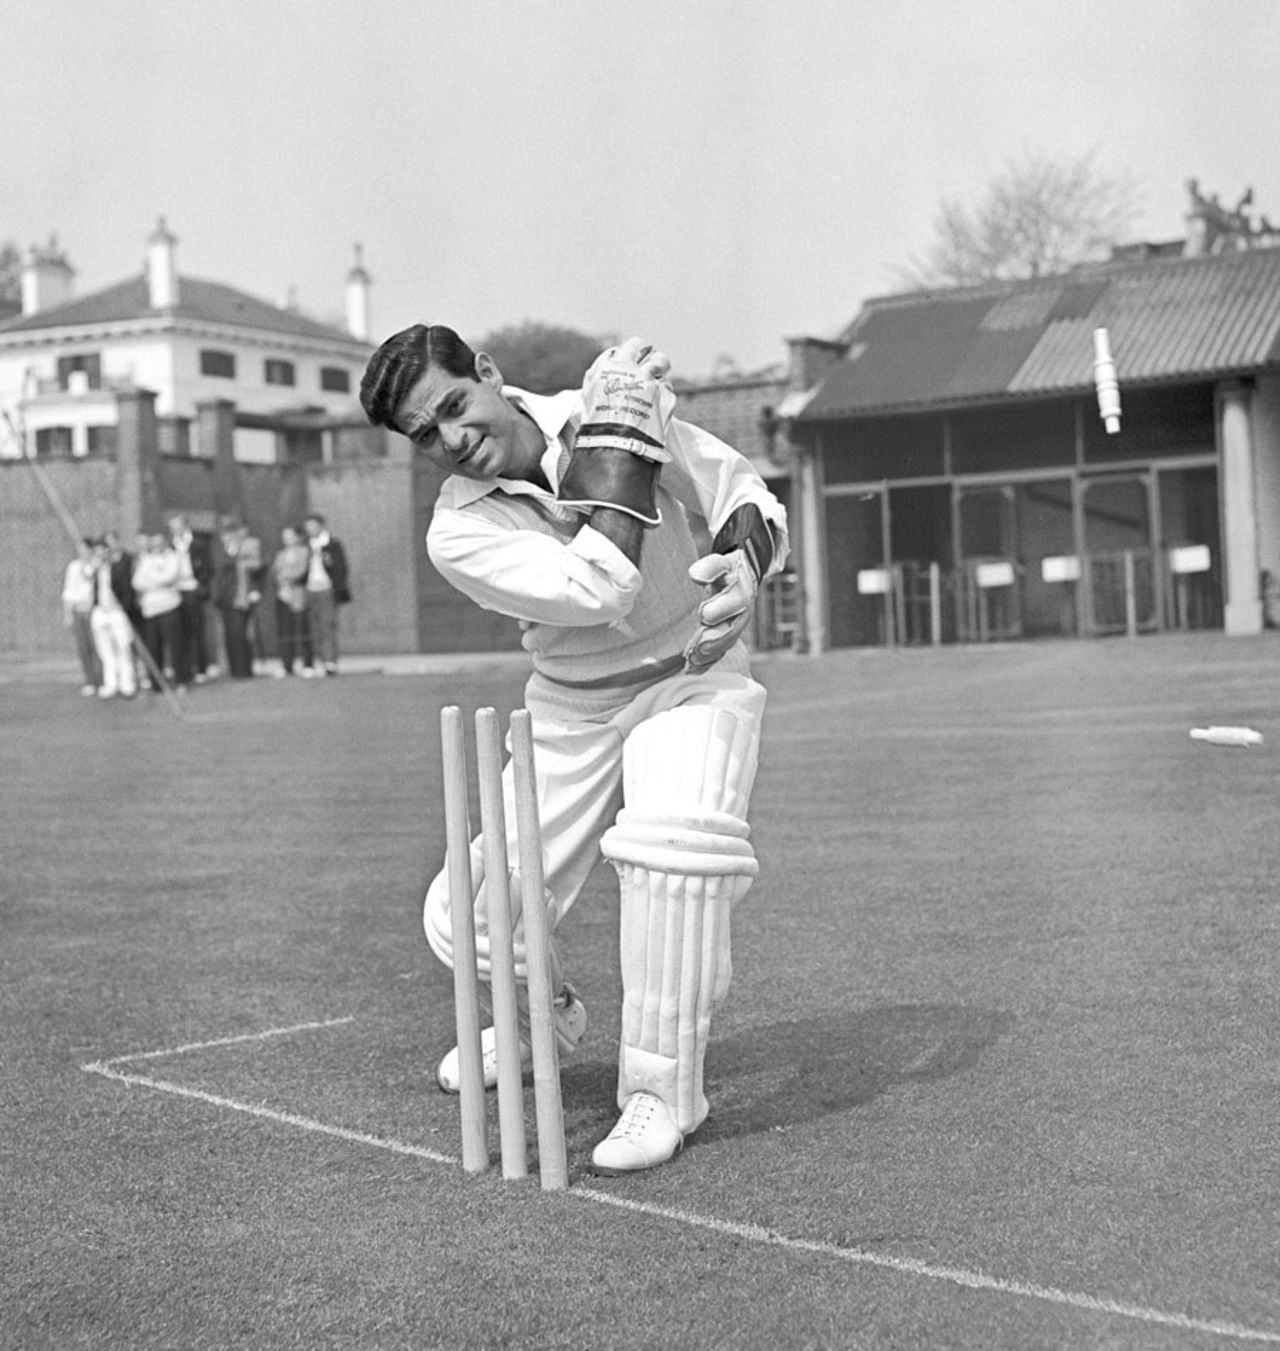 Indian wicketkeeper Naren Tamhane poses behind the stumps, April 21, 1959